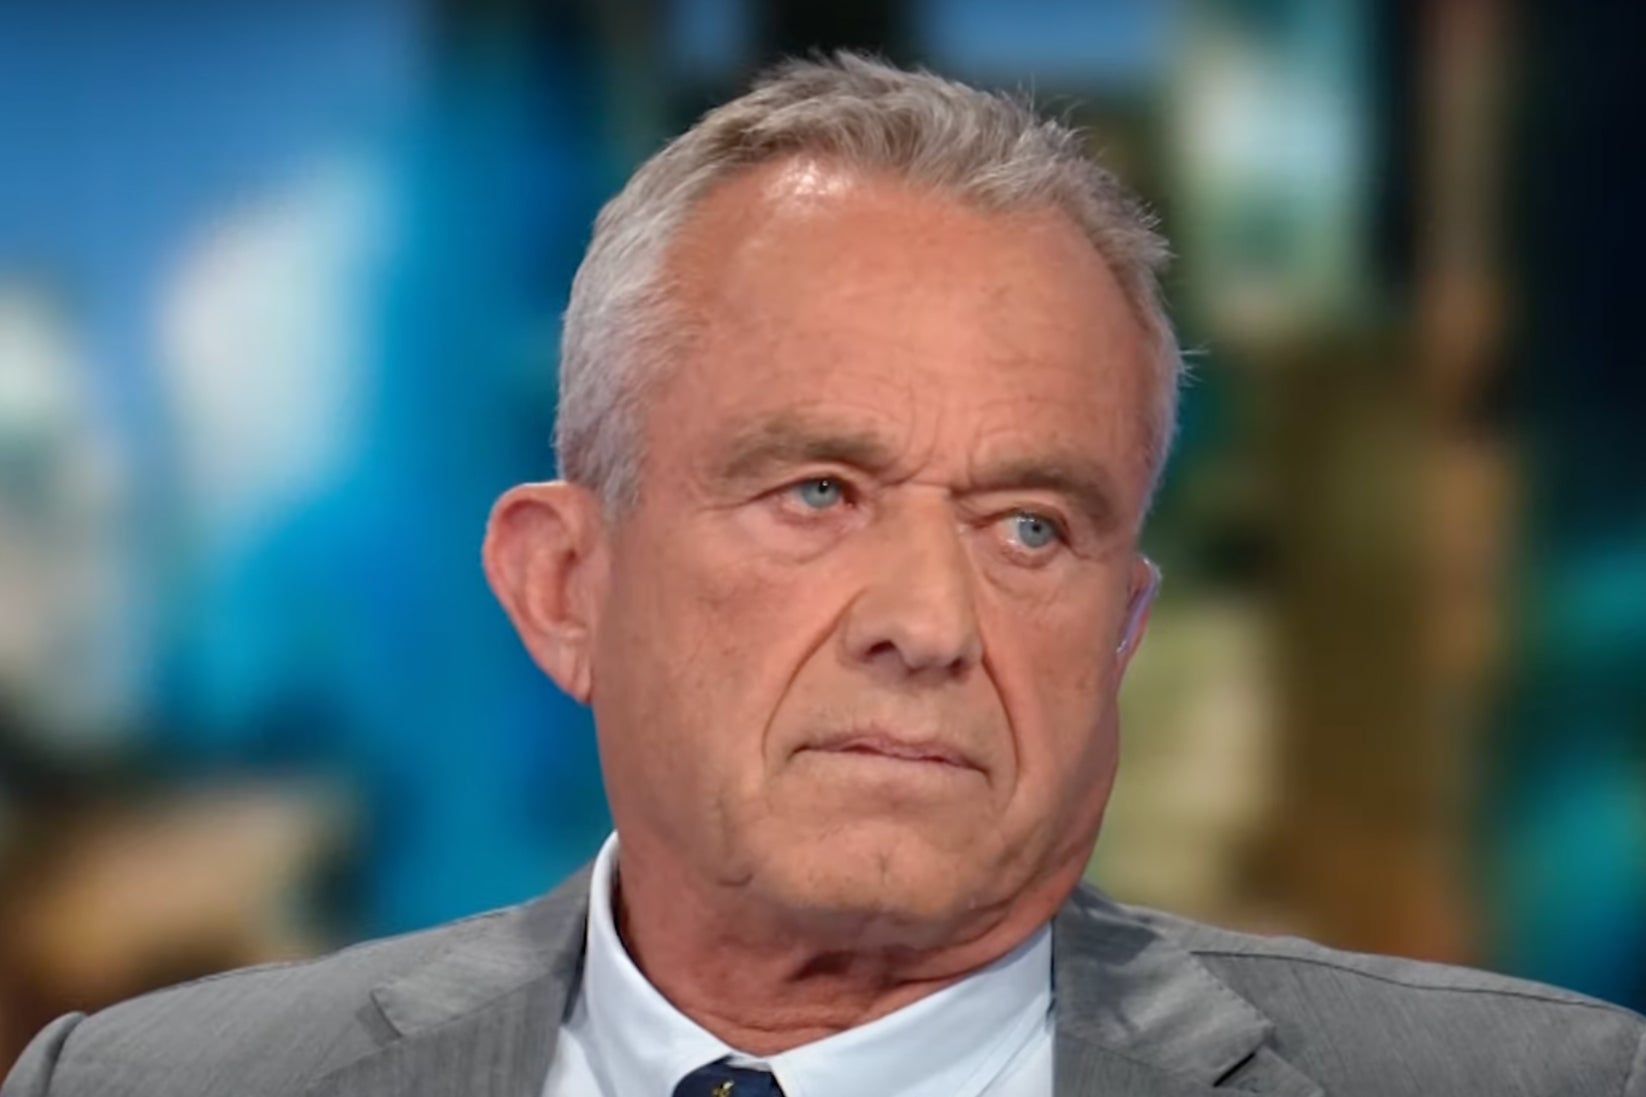 Robert F Kennedy Jr, an independent presidential candidate, said that President Joe Biden posed a greater threat to democracy than Donald Trump